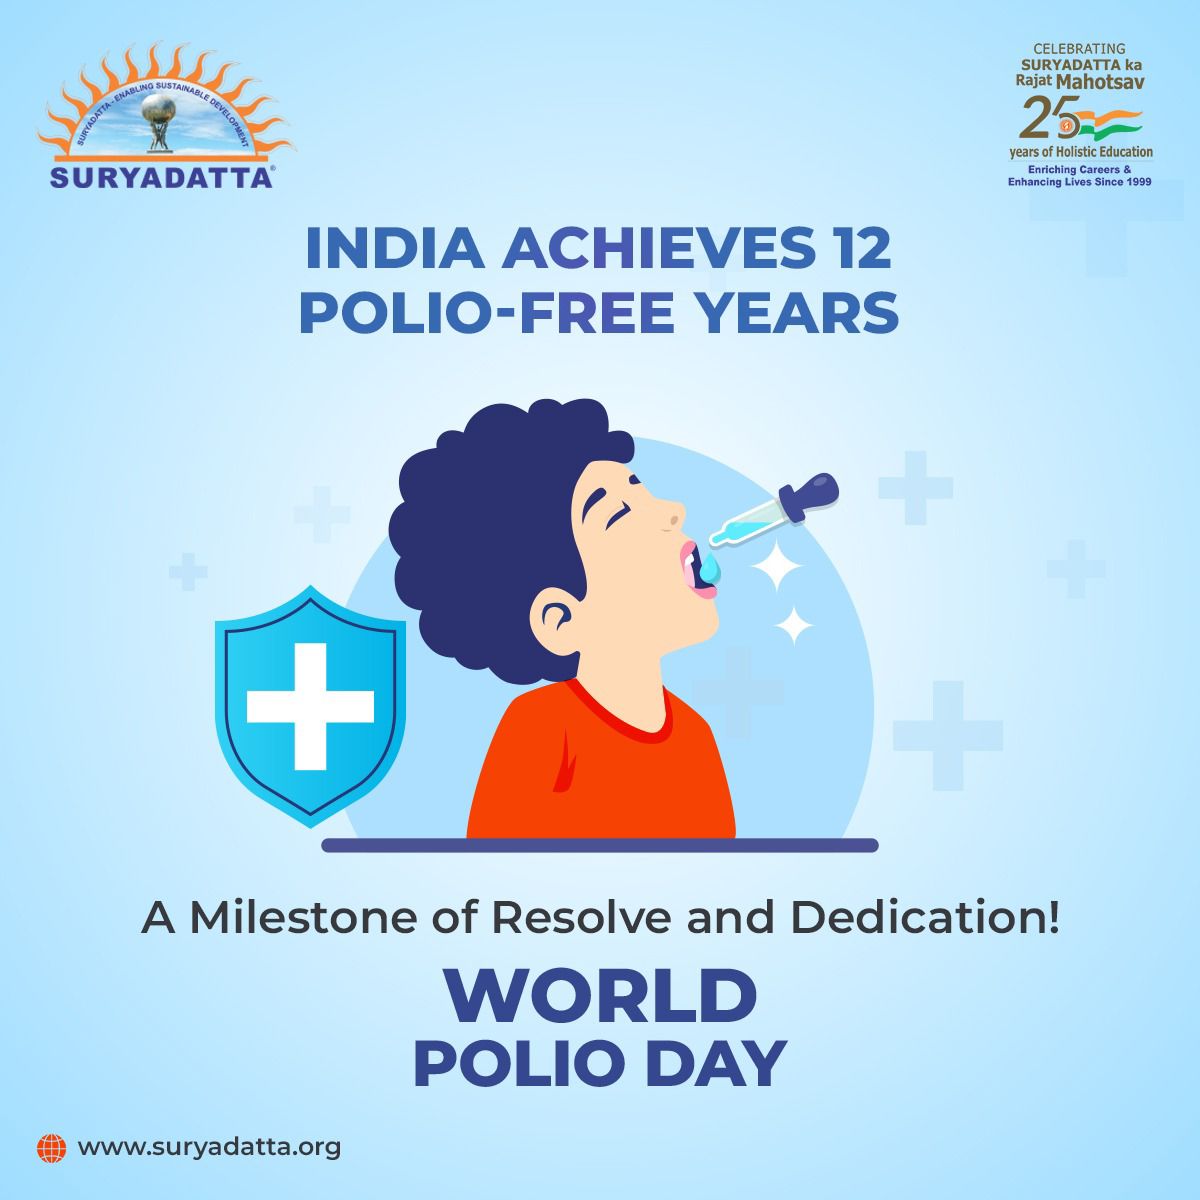 'India marks 12 years of being polio-free, a testament to relentless efforts in #publichealth. Let's applaud this triumph and continue the collective efforts towards a #healthier, disease-free nation. #SGI #WorldPolioDay #EndPolio #PolioEradication #VaccinesWork #PolioFreeWorld